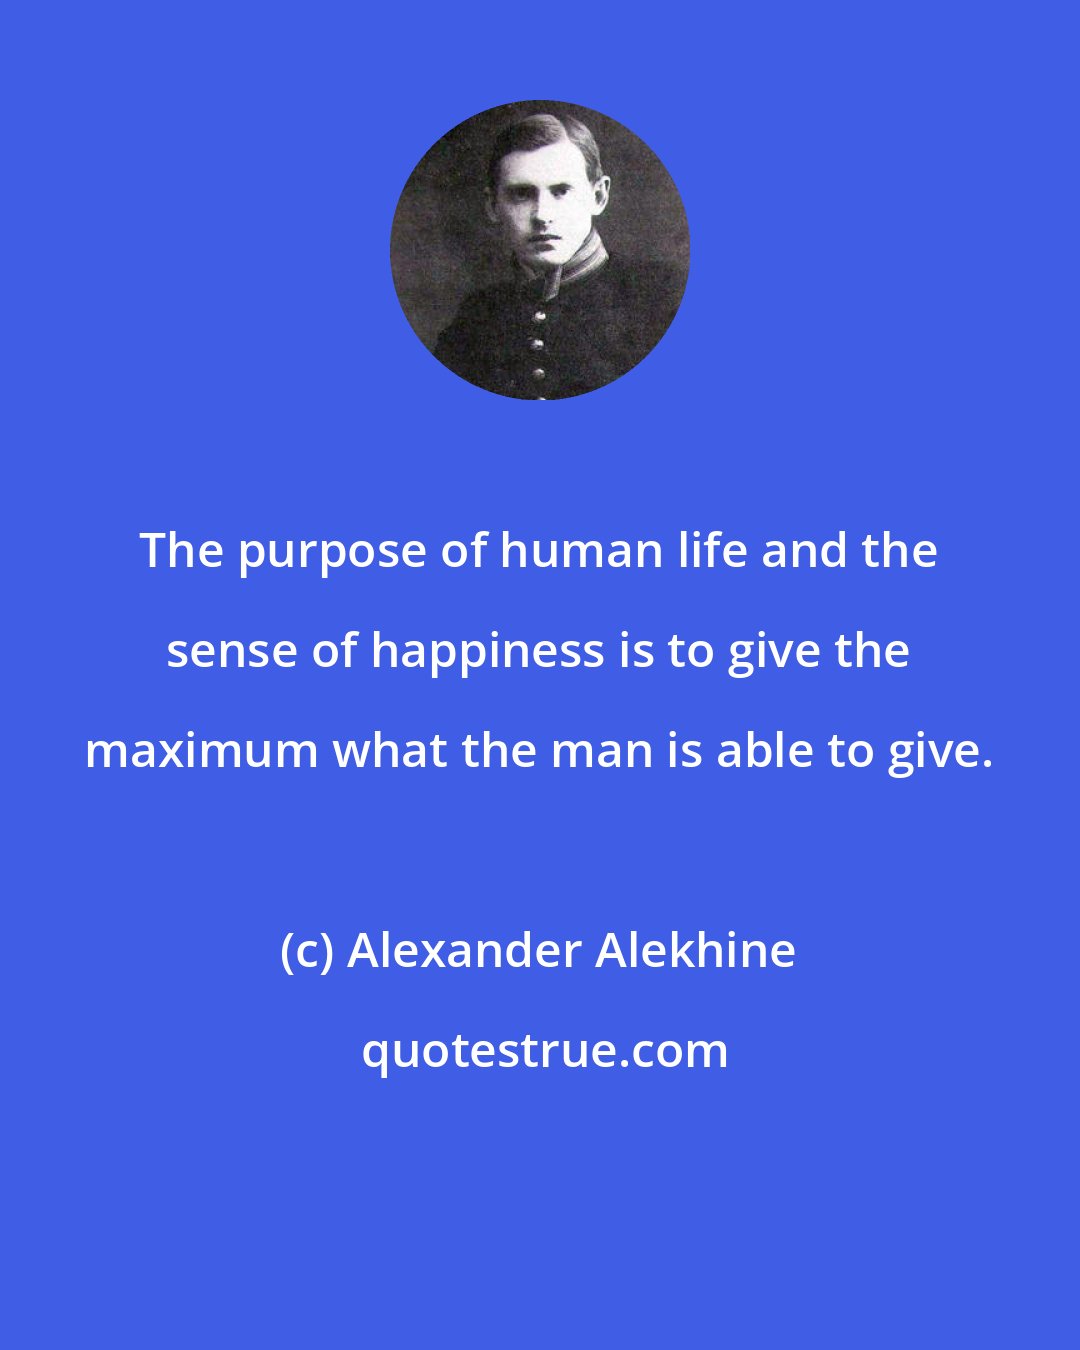 Alexander Alekhine: The purpose of human life and the sense of happiness is to give the maximum what the man is able to give.